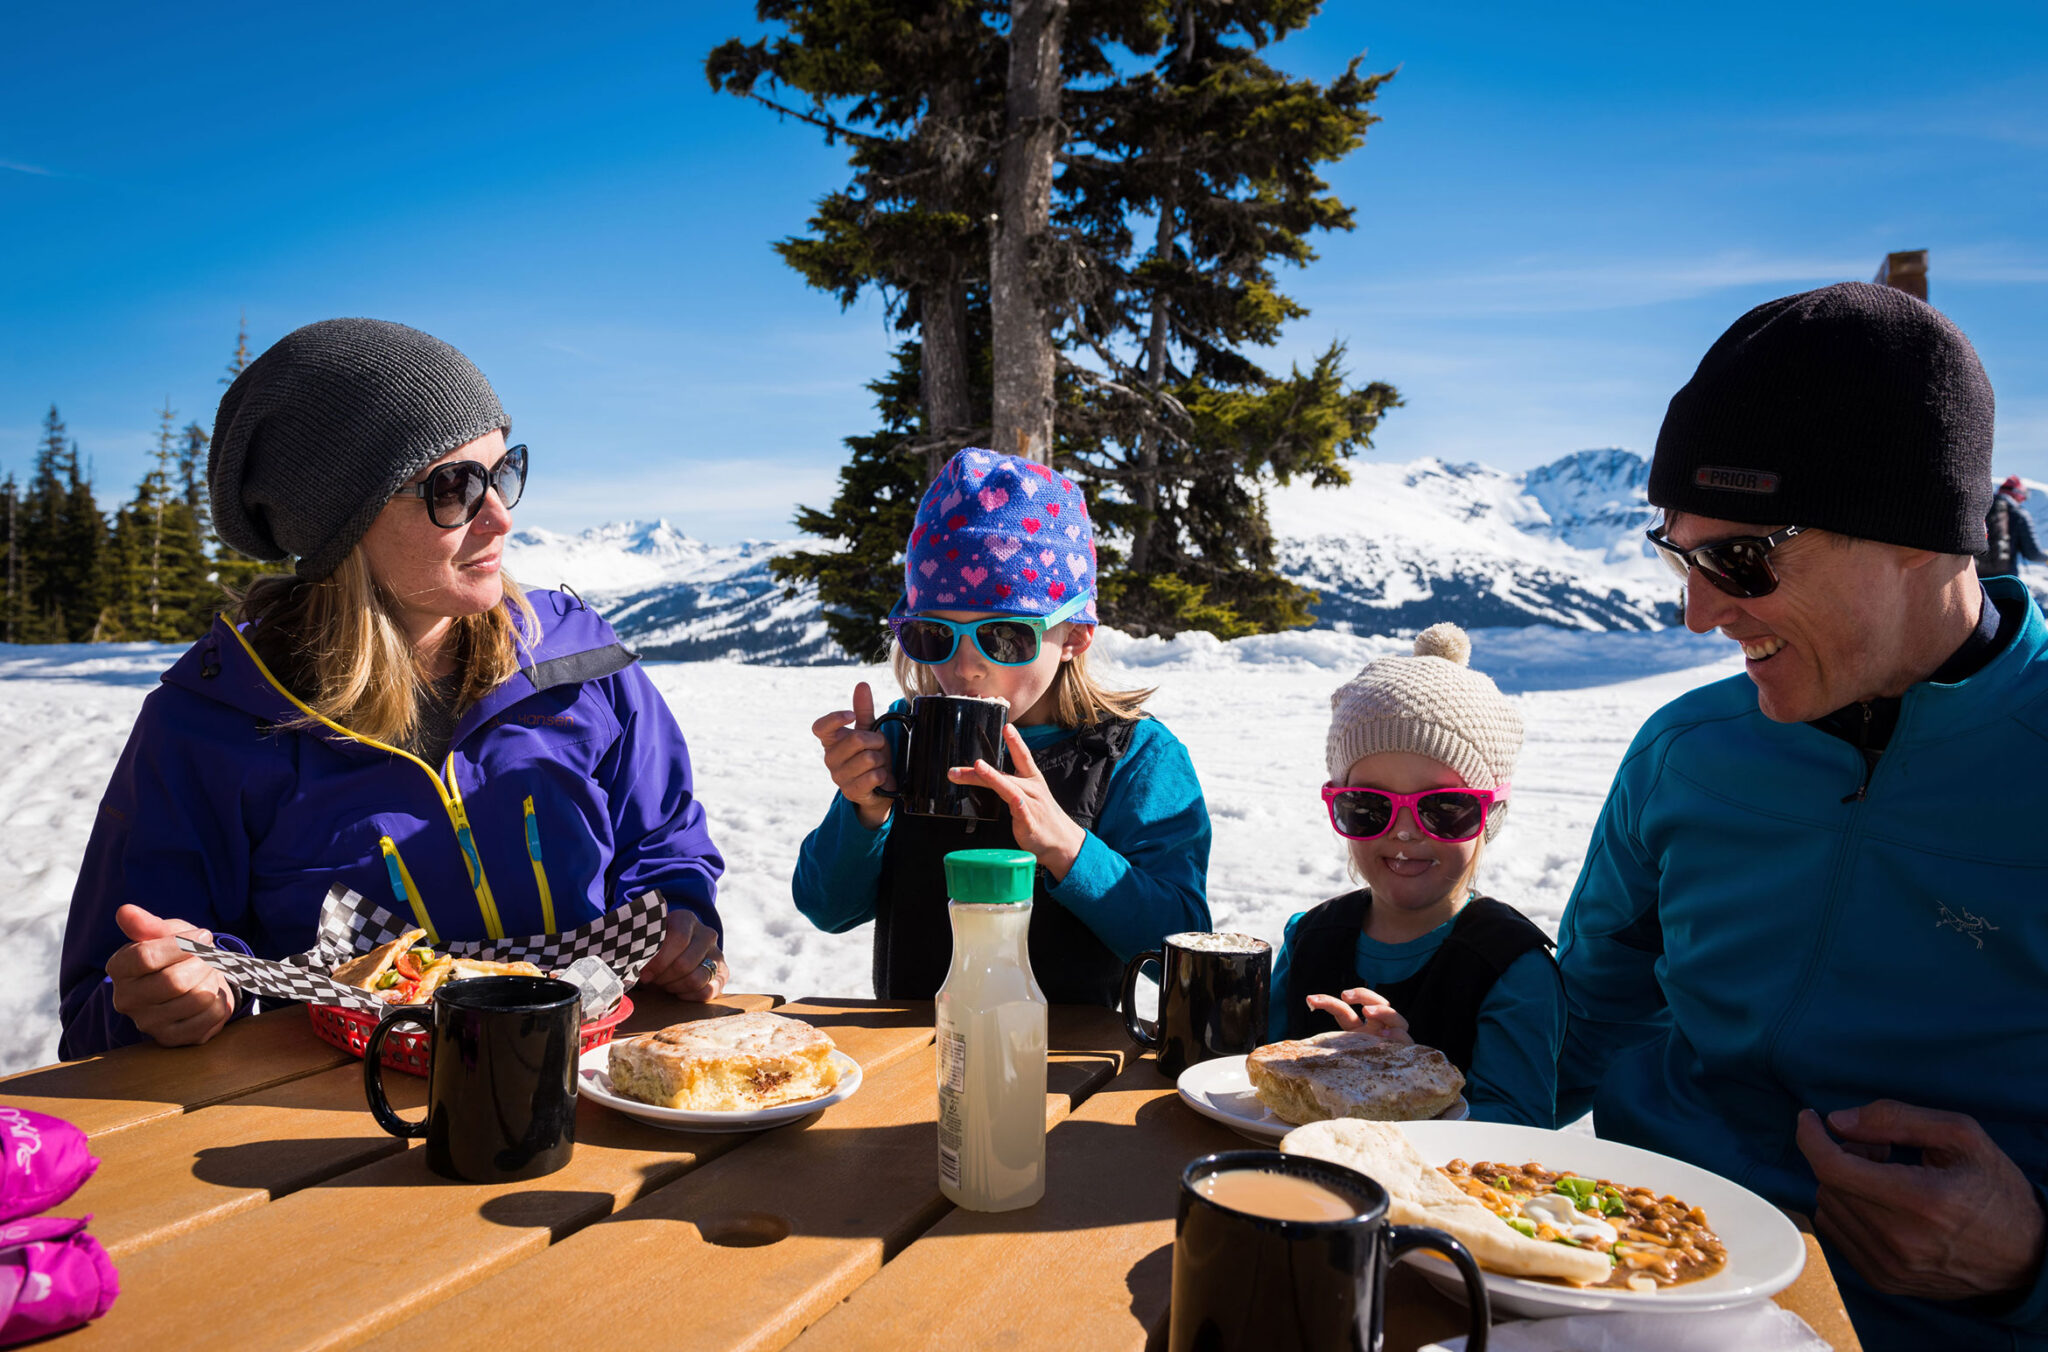 A family with two young children enjoy lunch up the mountains in Whistler on a sunny, winter day.